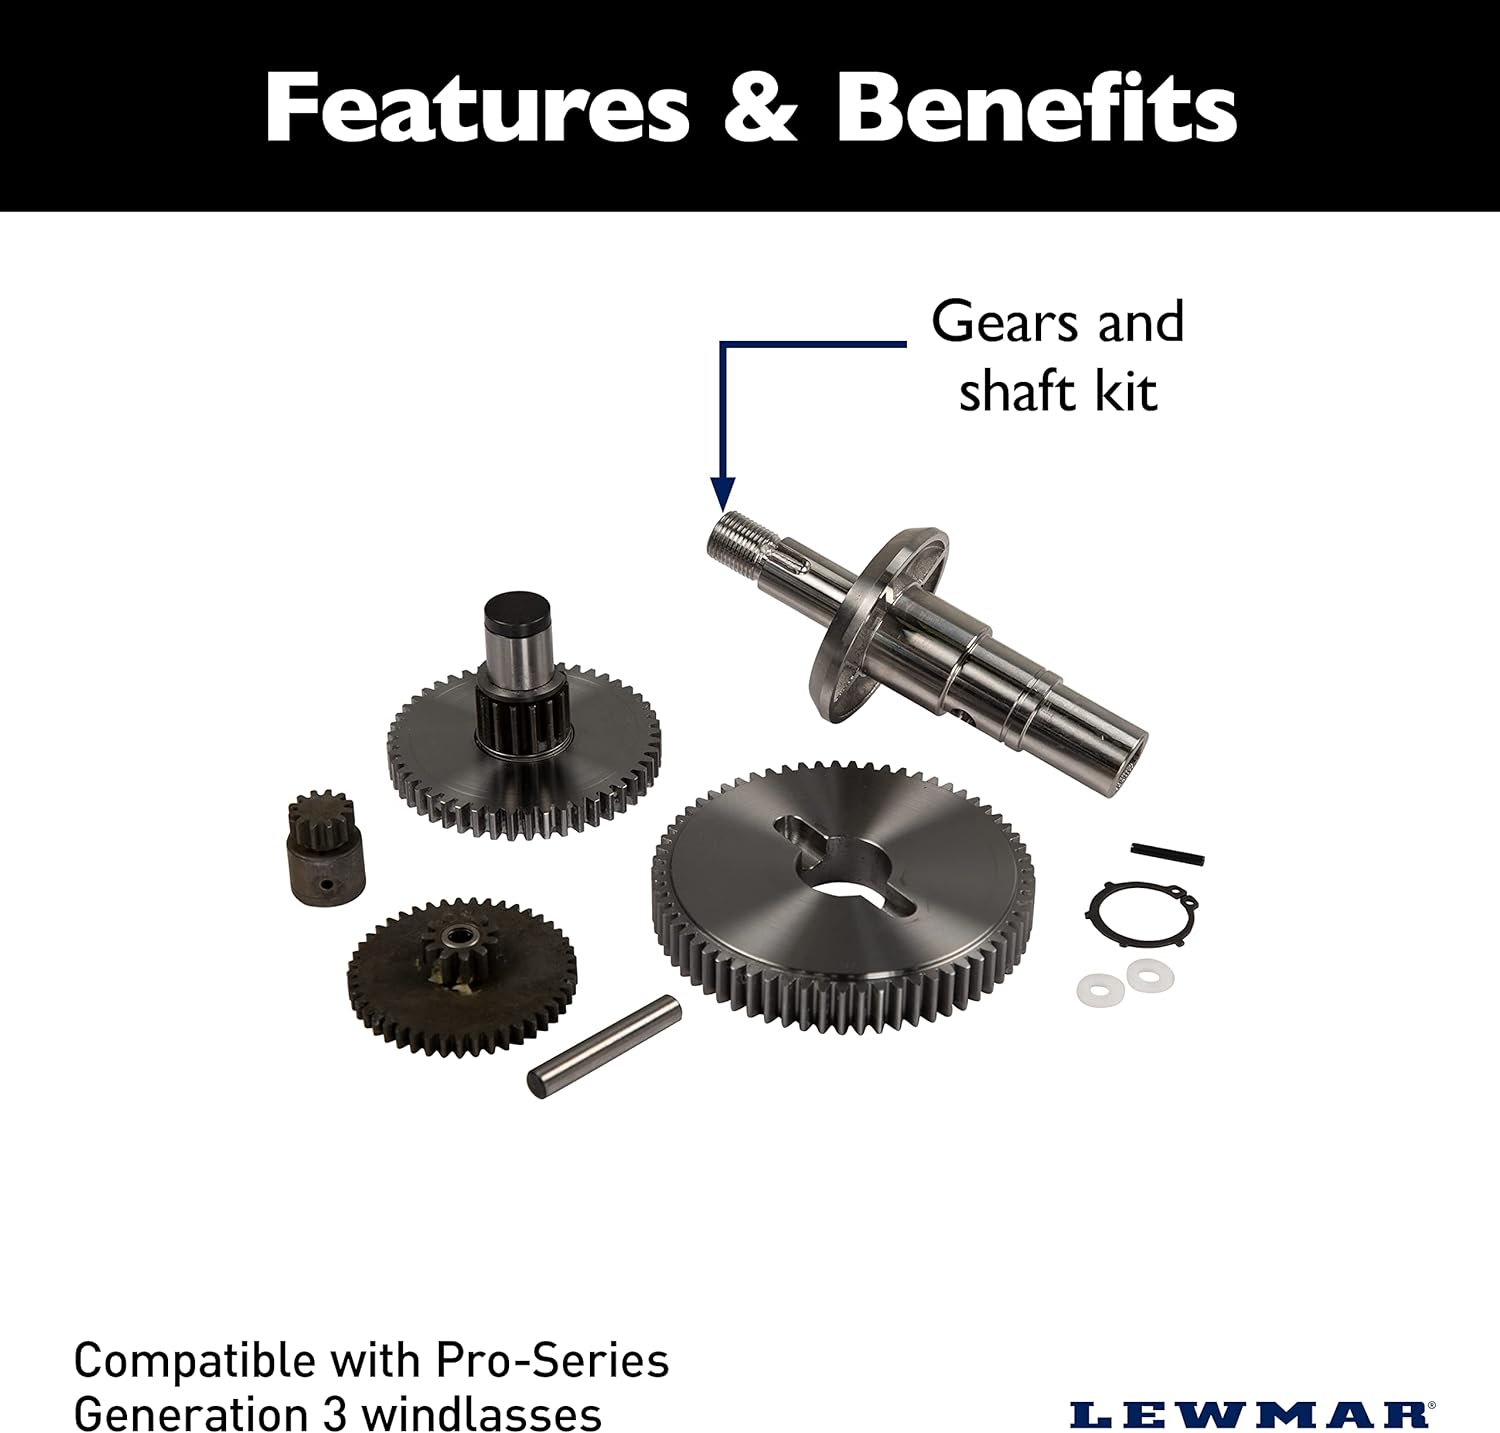 Lewmar 3rd Generation Replacement Gears/Shaft Kit for Pro-Series Boat Anchor Windlasses - 2020201008 - Lewmar Pro-Series Windlass Gear Replacement Kit Review